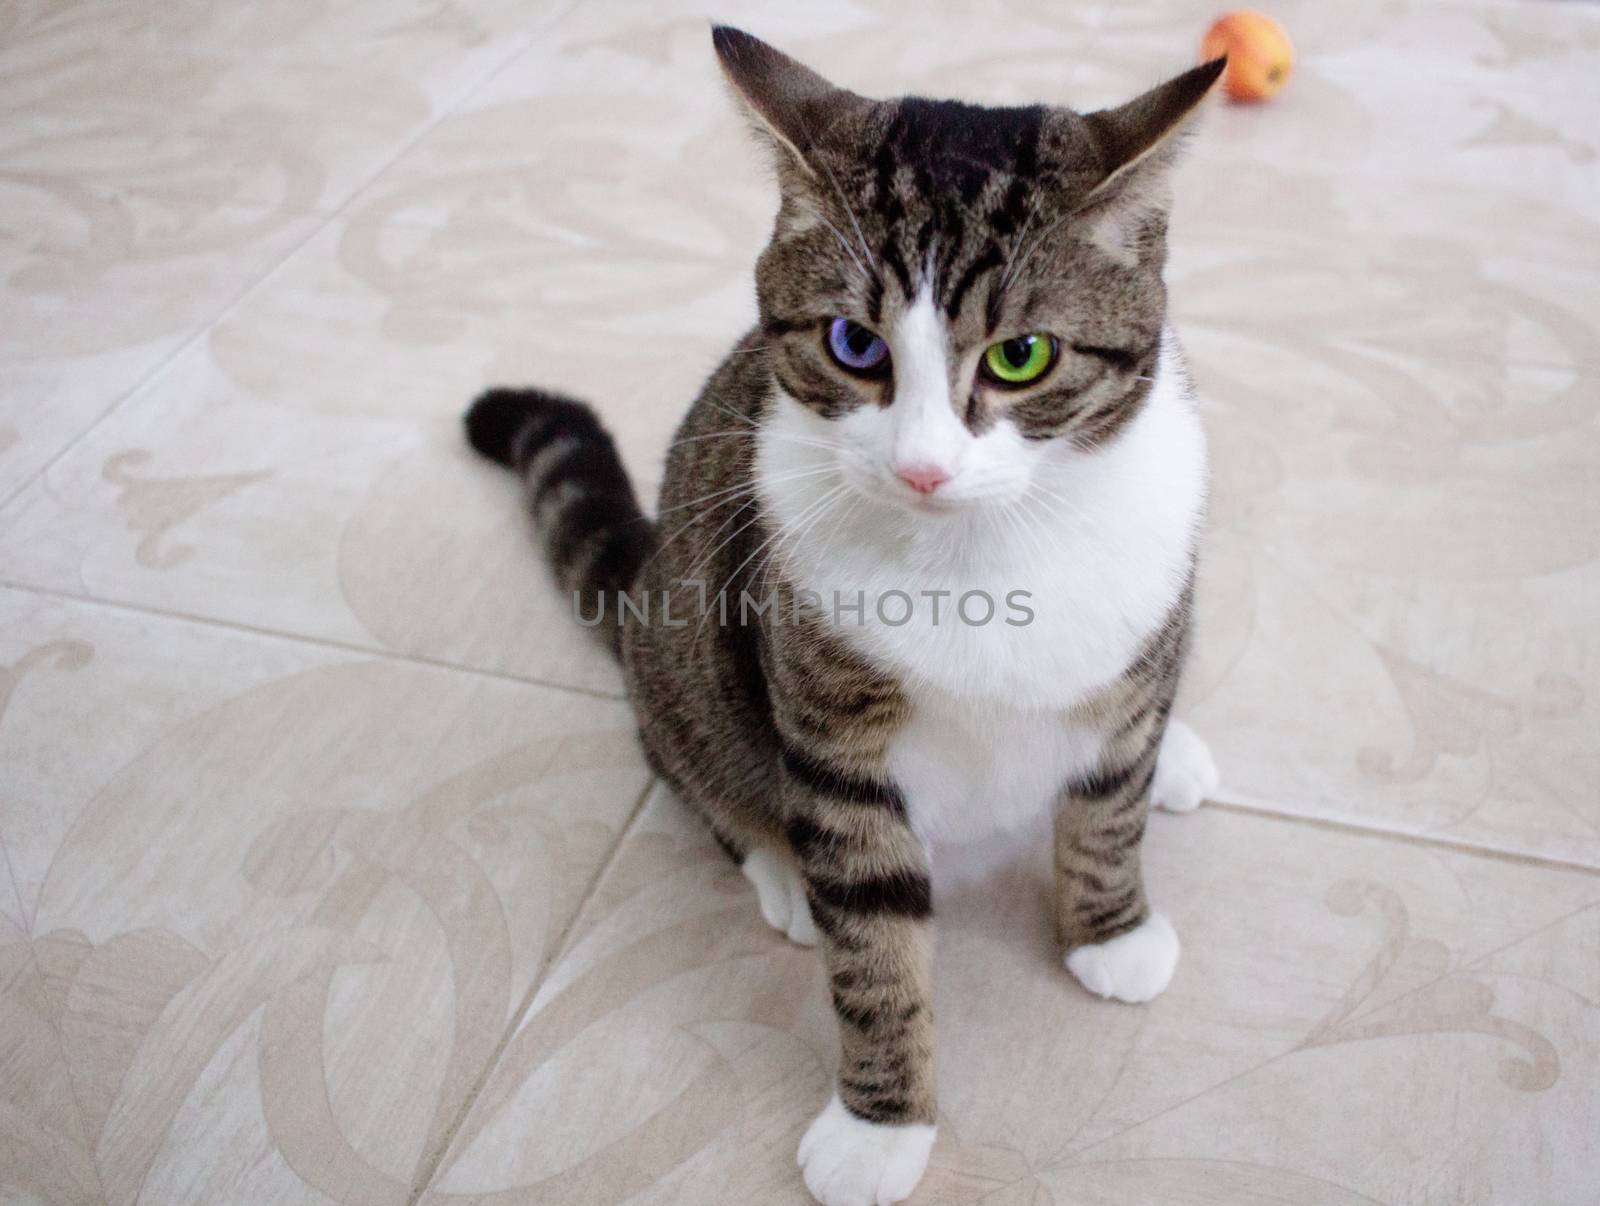 Cat with bright multicolored eyes sits on floor posing by VeraVerano